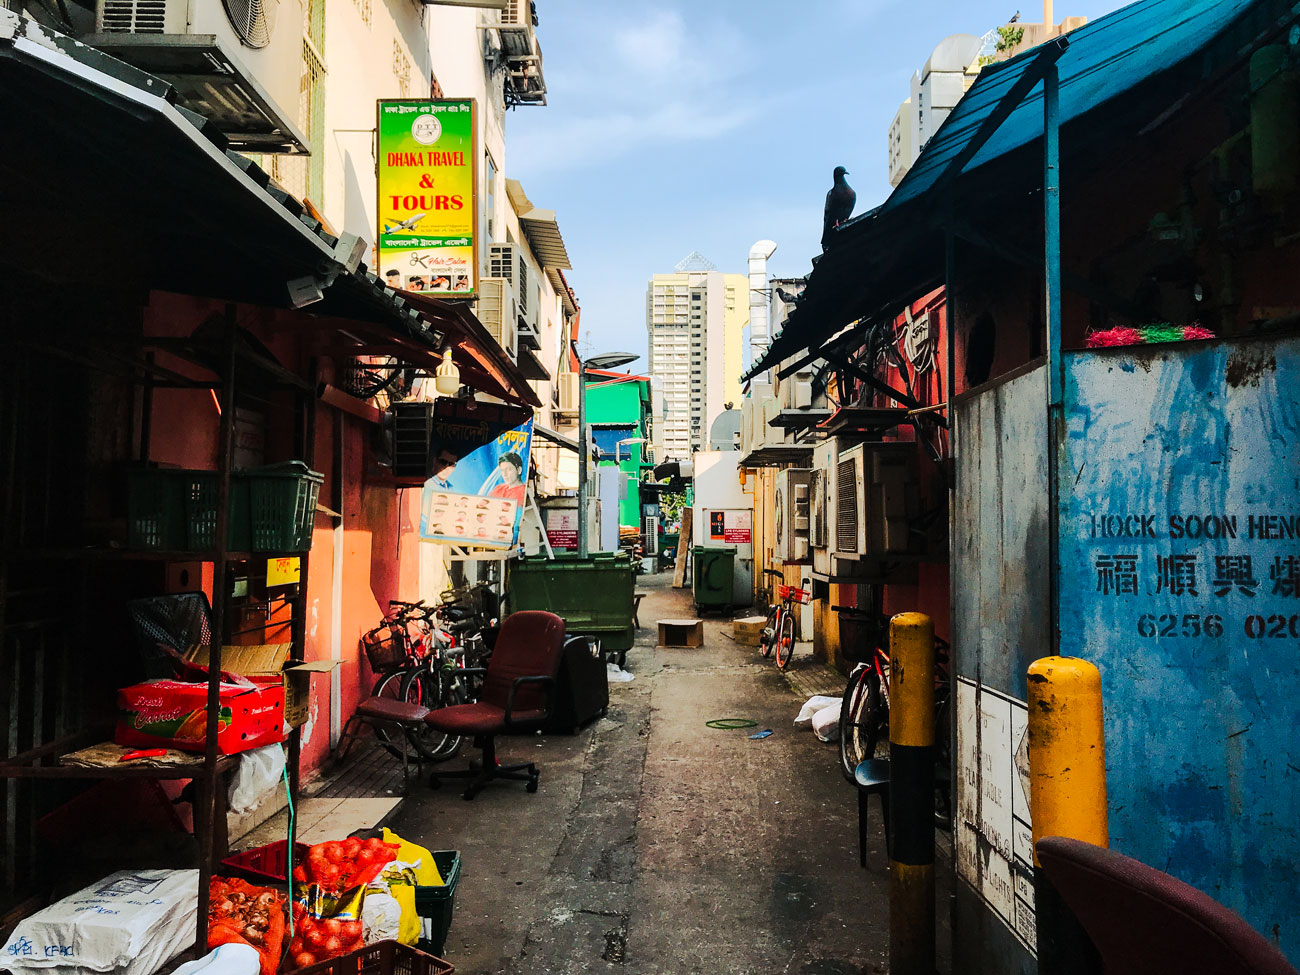 An alley of Little India.